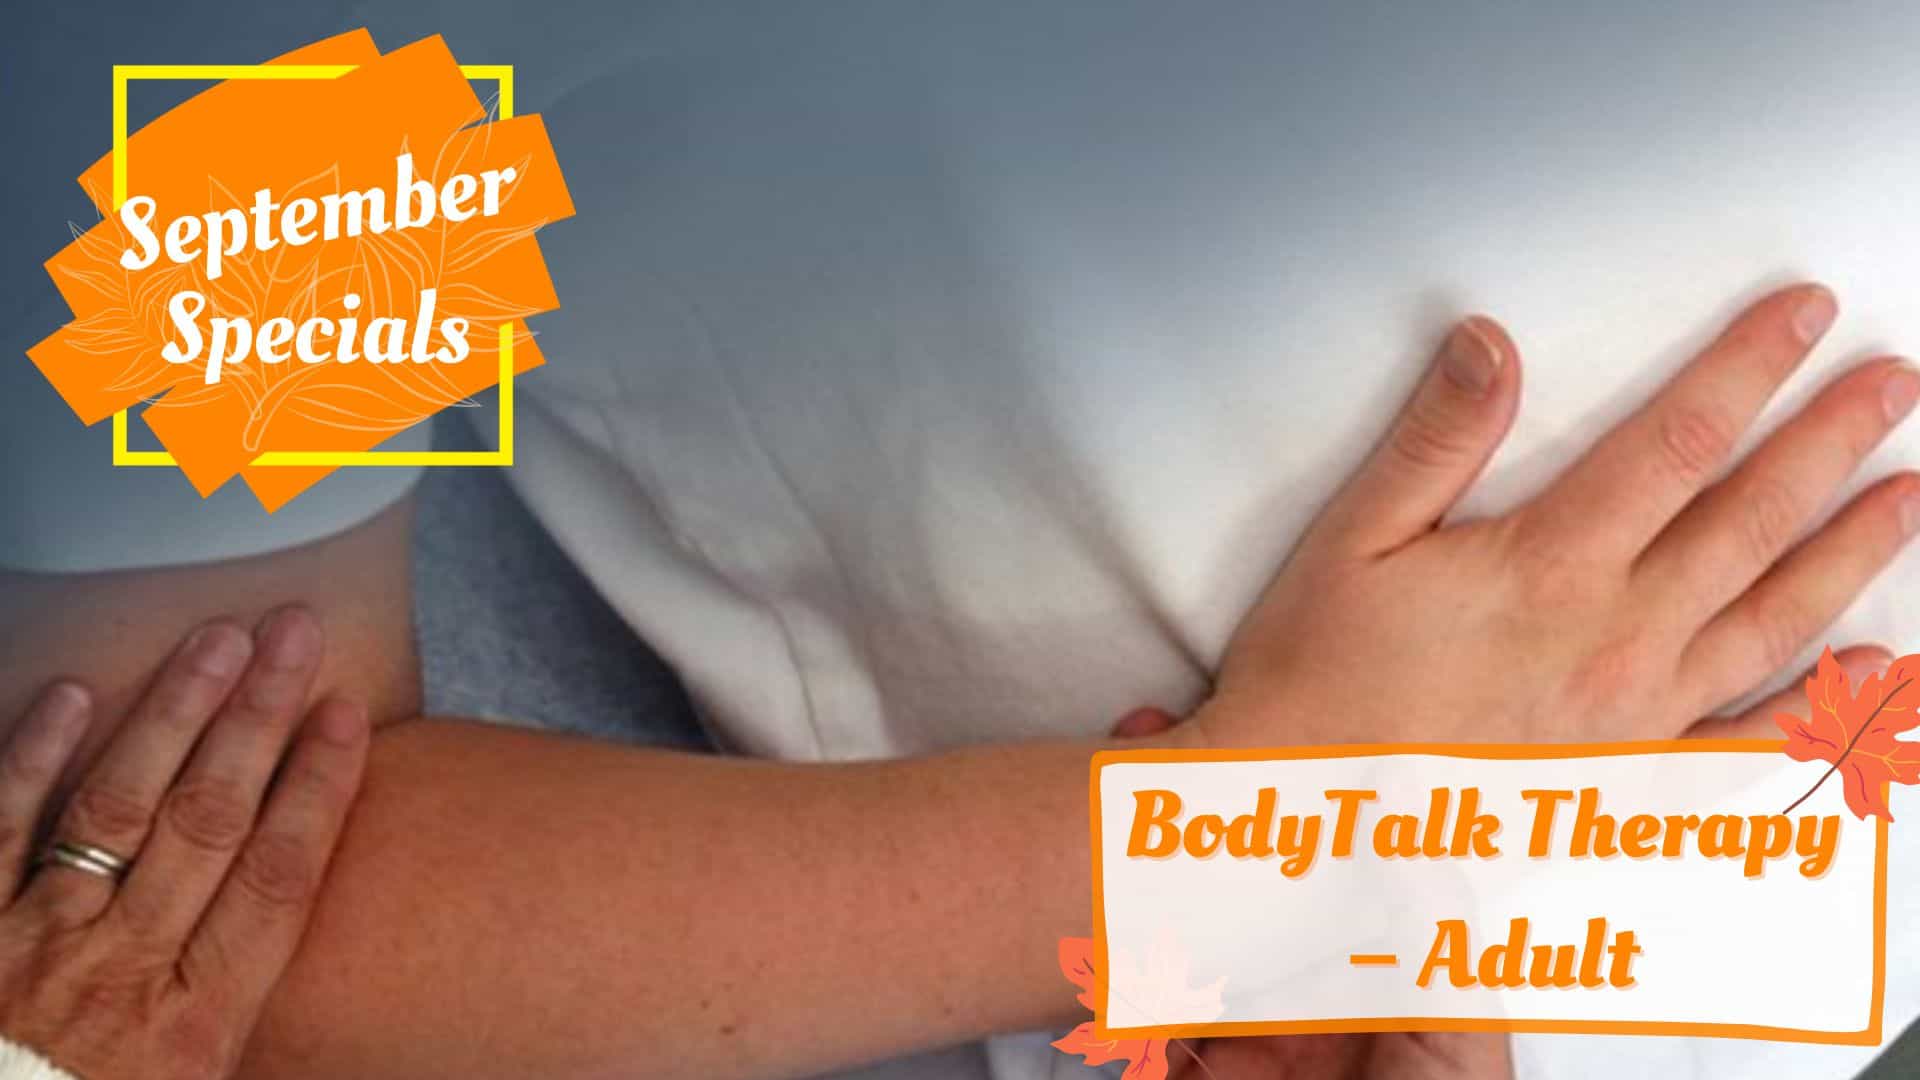 Specials - BodyTalk Therapy - Adult